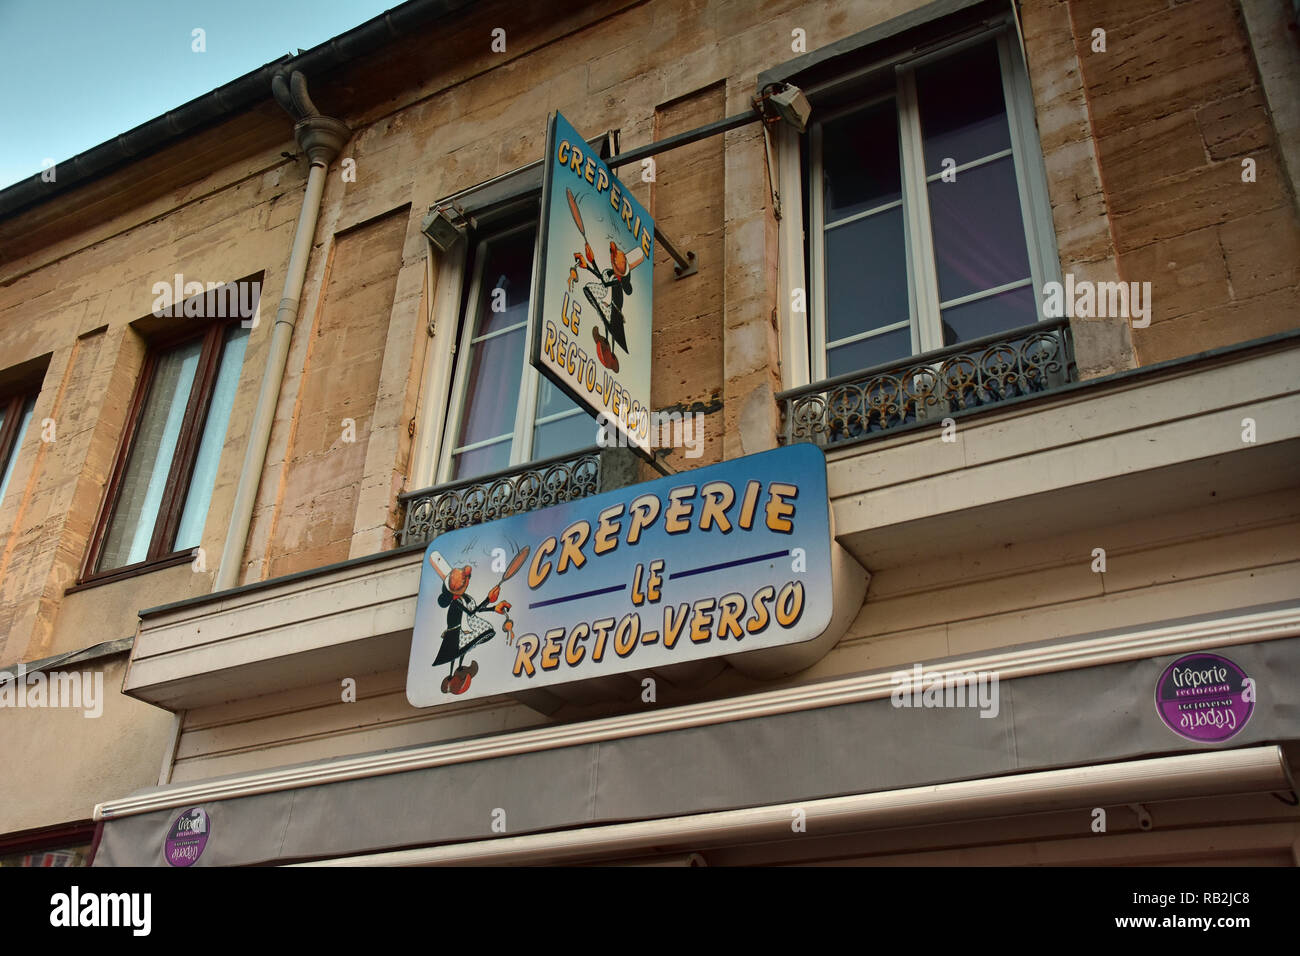 Creperie, Aramanches des Bains, Normandy, France Stock Photo